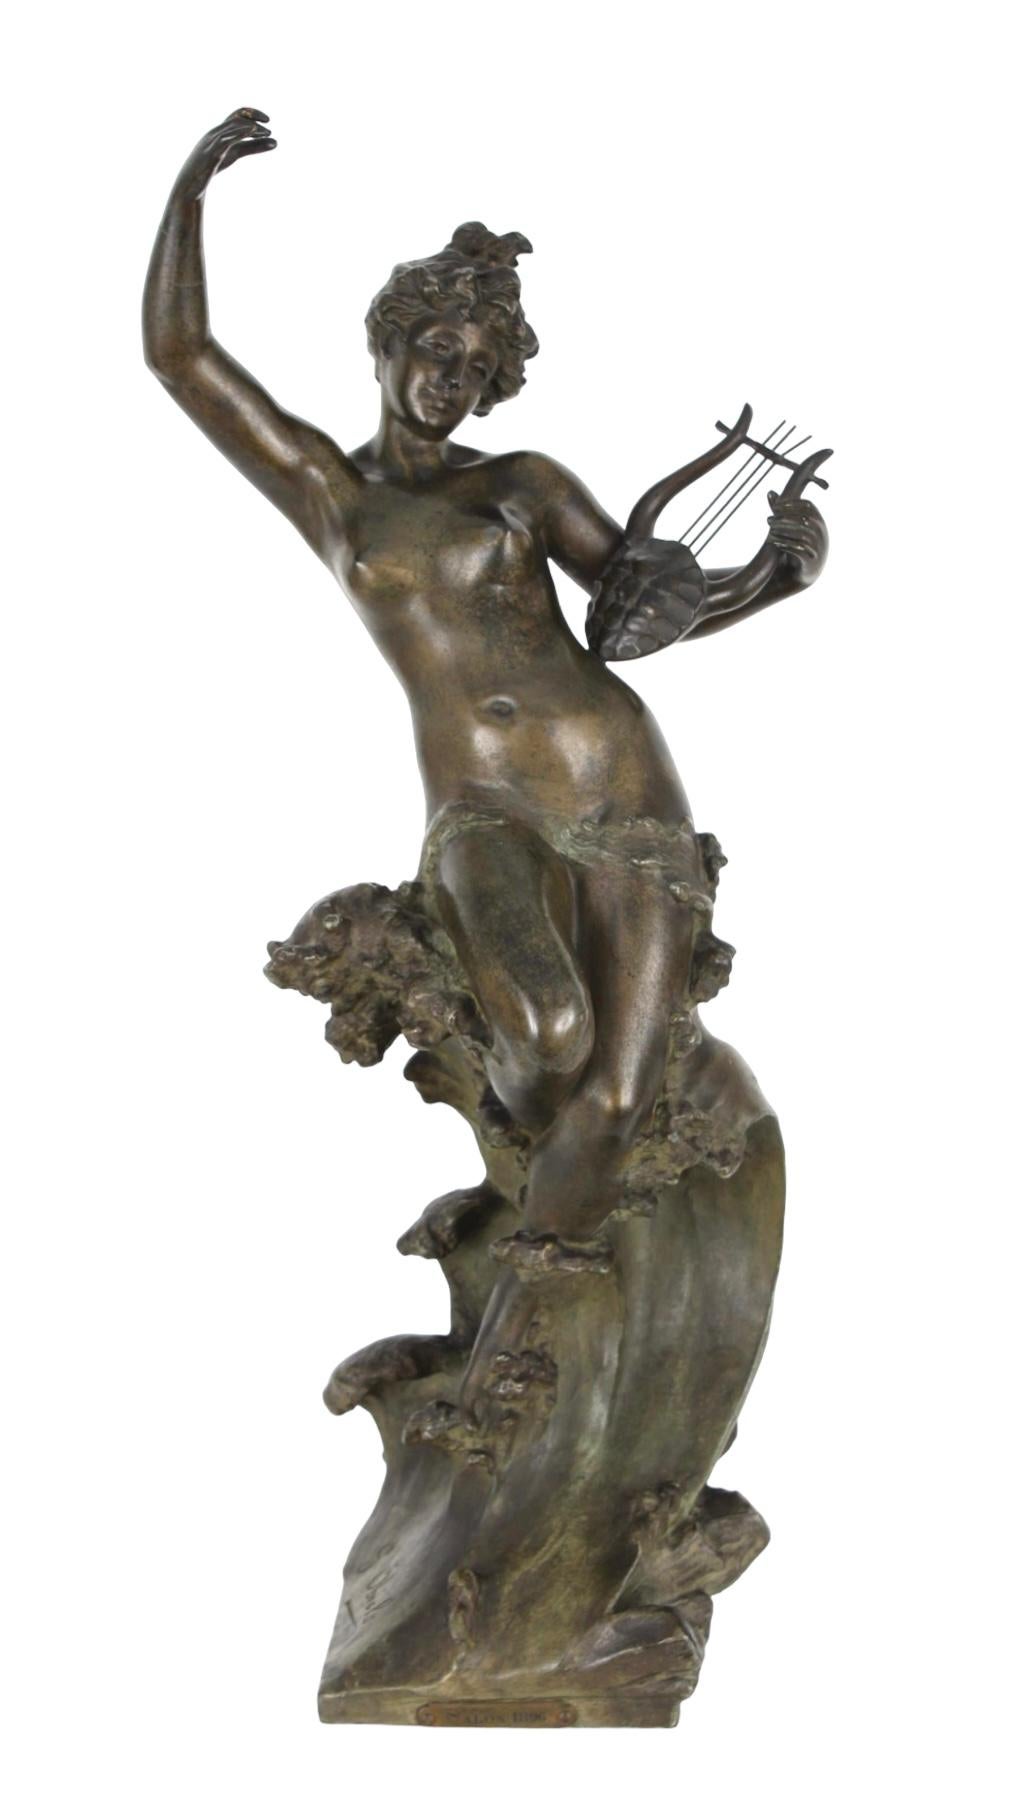 20th Century French Bronz Sculpture of Sea Nymph After Gustavo Obiols (1858-1910) For Sale